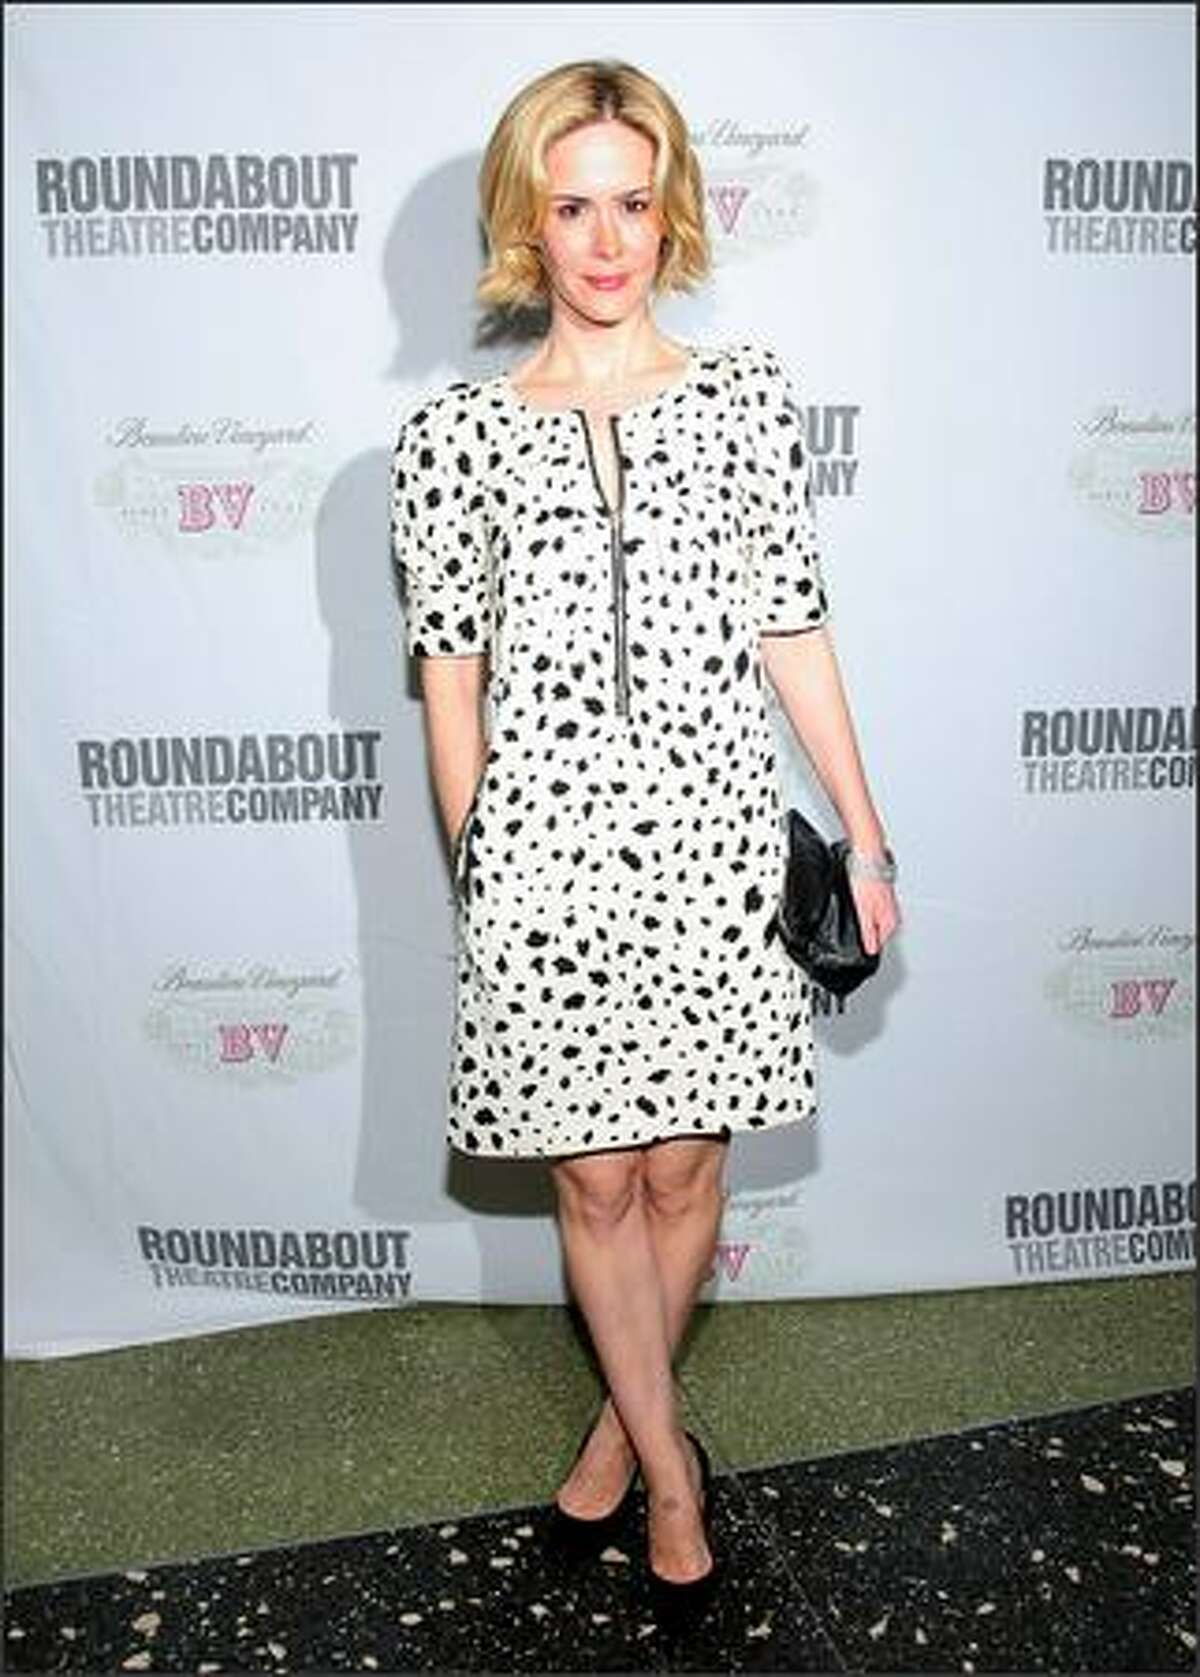 Actress Sarah Paulson attends "Take Me Back To Manhattan," Roundabout Theatre Company's annual spring gala at Roseland Ballroom on Monday in New York City.